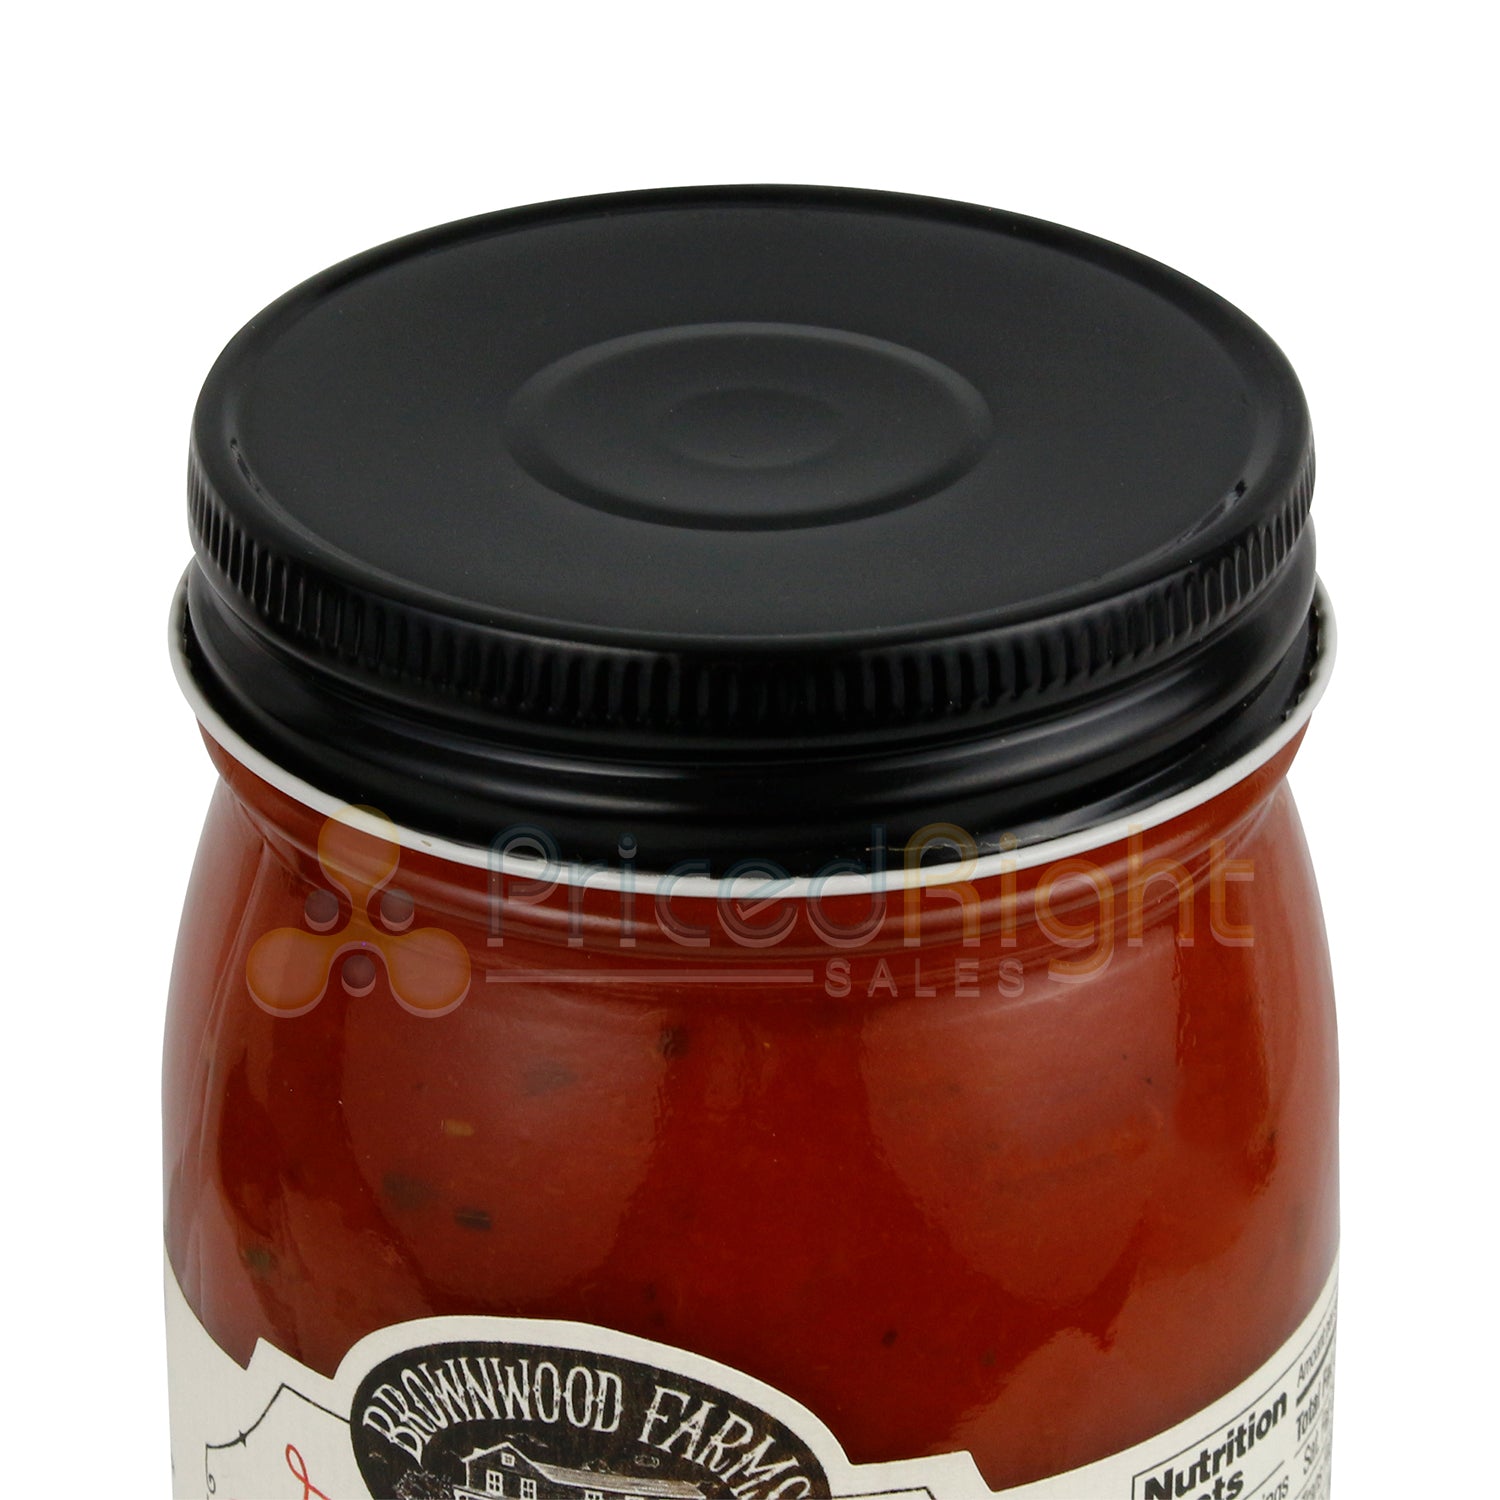 Brownwood Farms Old World Pizza Red Sauce With Malbec Wine Gluten-Free 16 Oz